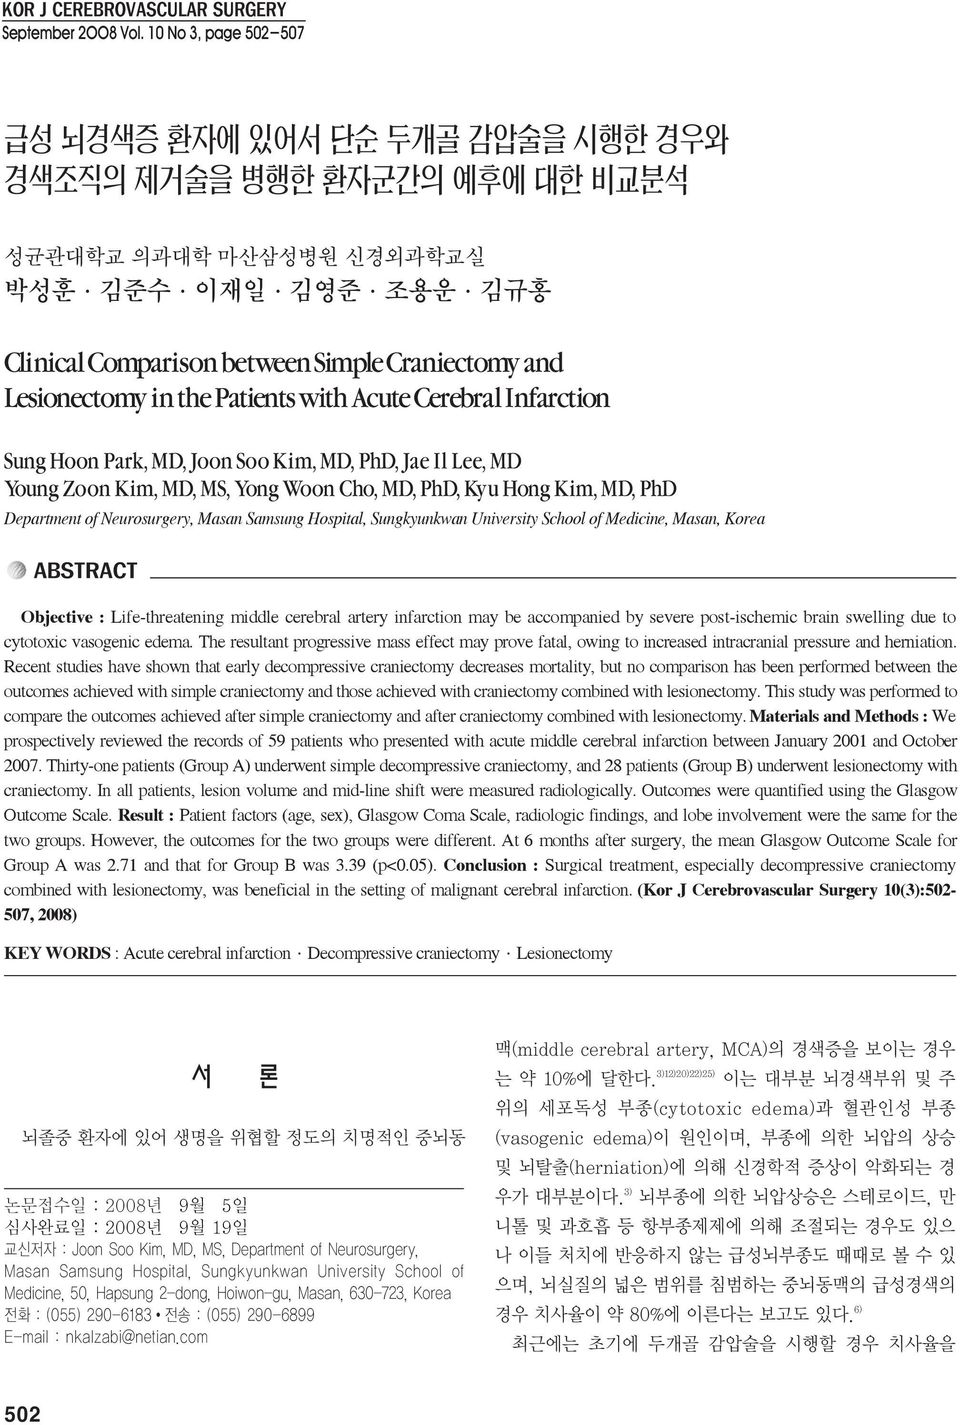 Lesionectomy in the Patients with Acute Cerebral Infarction Sung Hoon Park, MD, Joon Soo Kim, MD, PhD, Jae Il Lee, MD Young Zoon Kim, MD, MS, Yong Woon Cho, MD, PhD, Kyu Hong Kim, MD, PhD Department